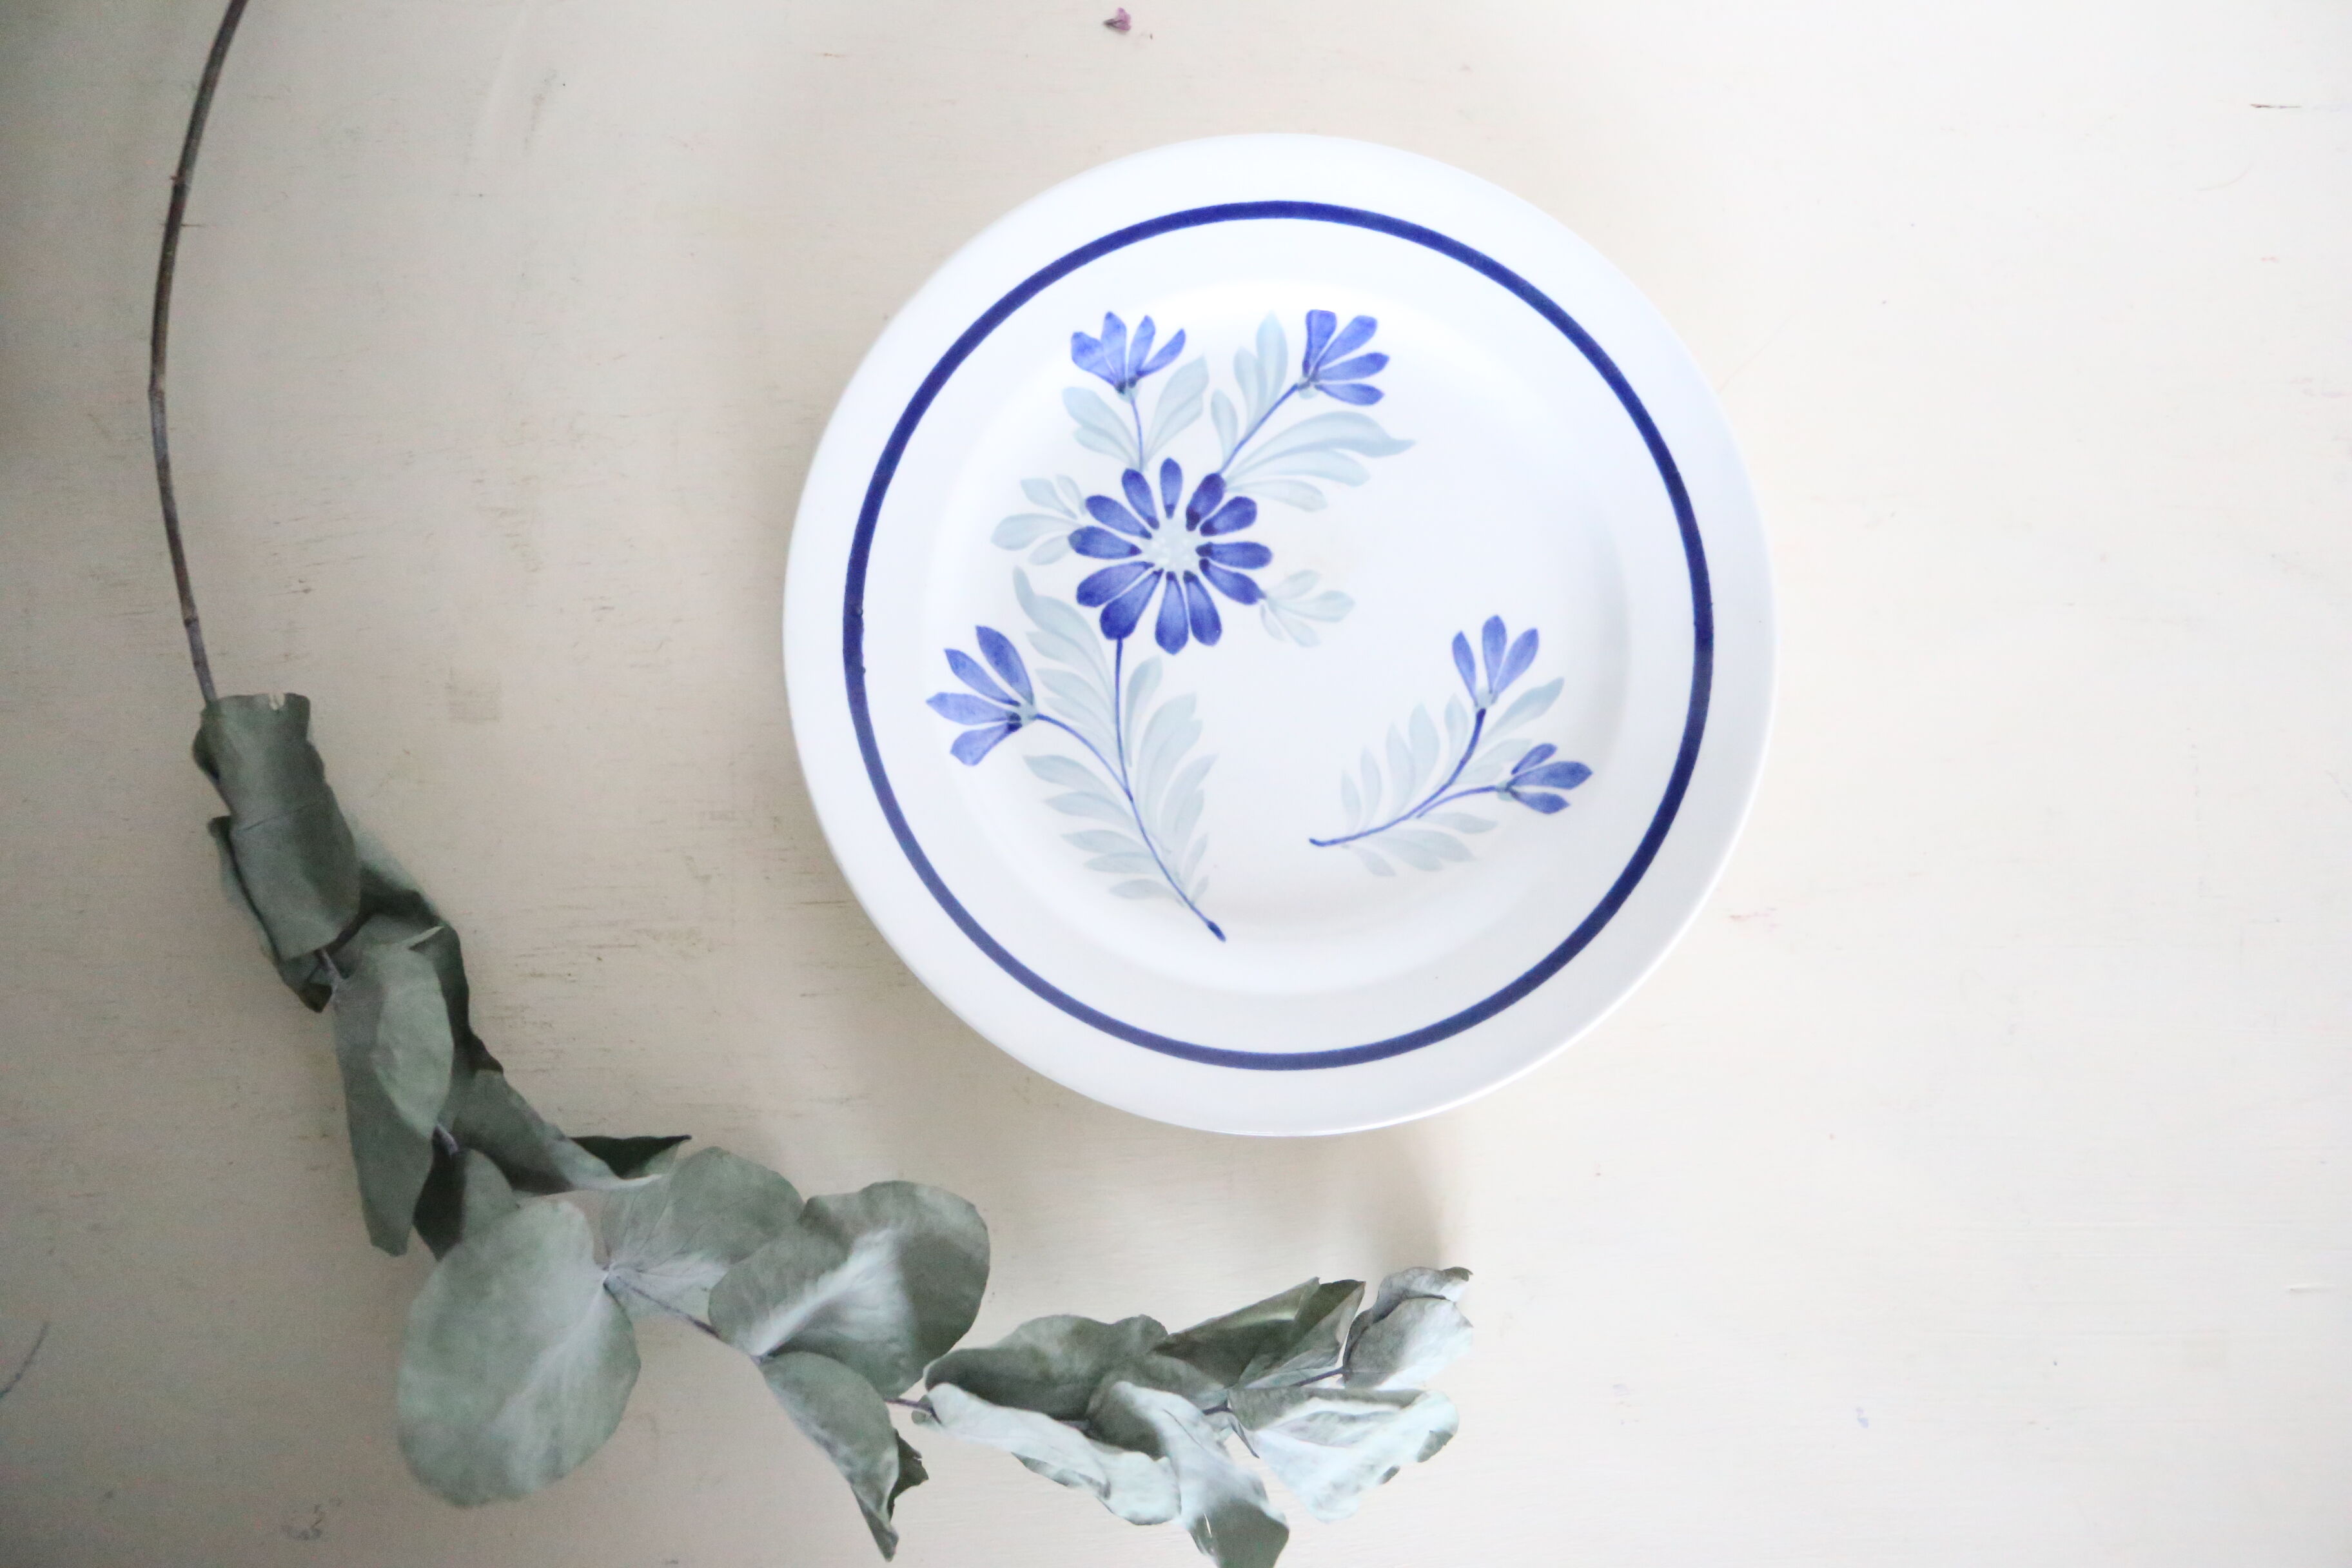 Saint AMAND plate fondue blue flowers plate with vintage fondue dishes old French table art